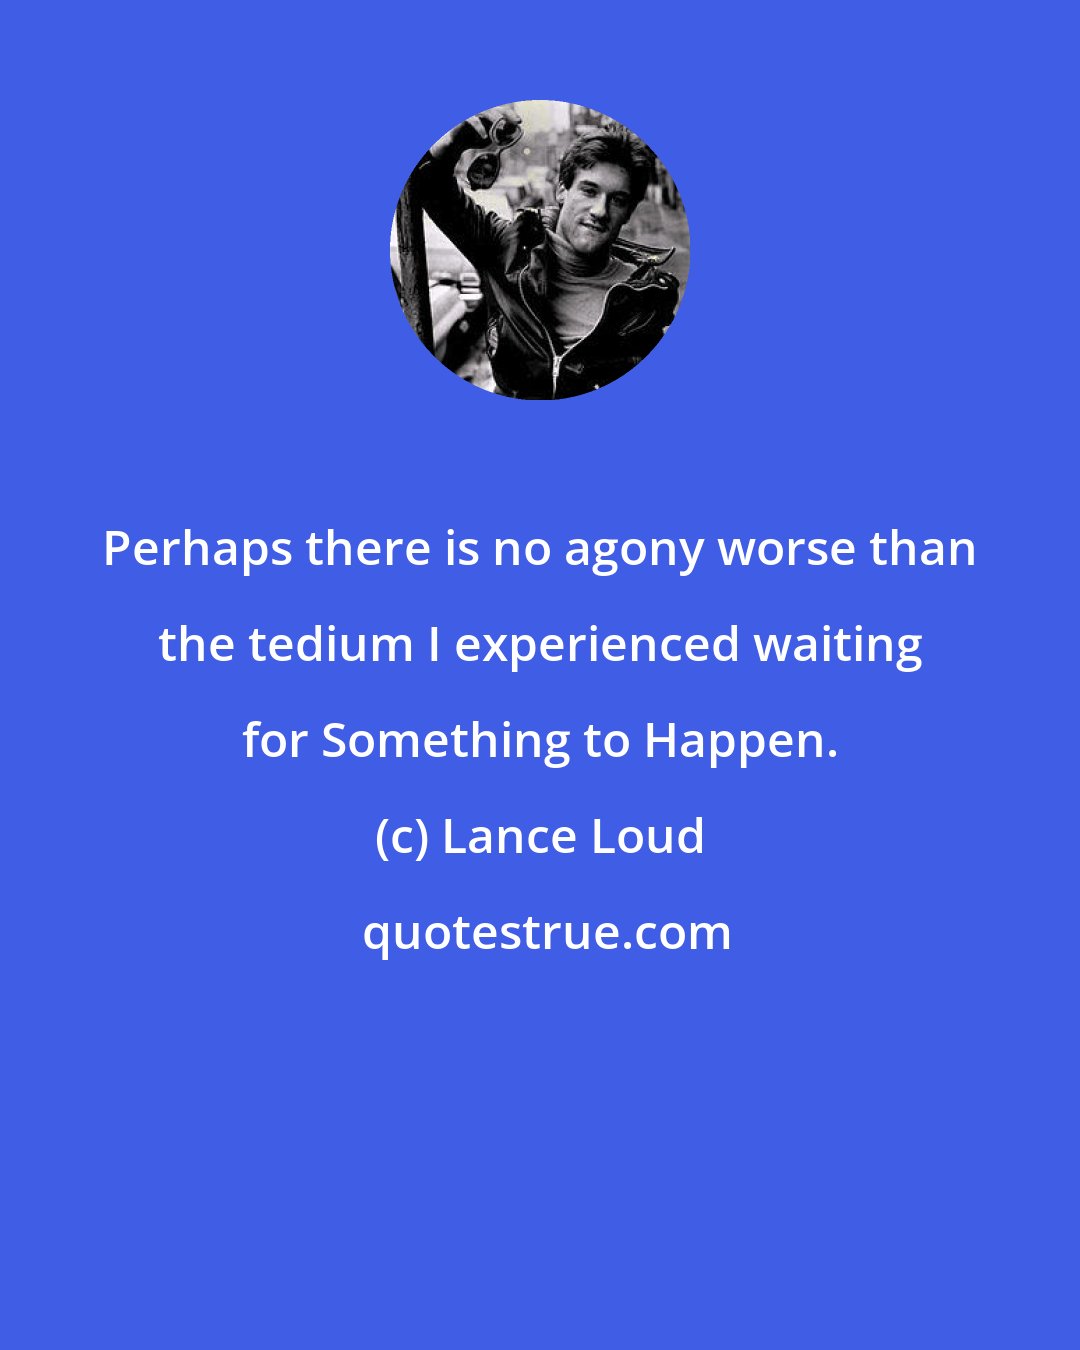 Lance Loud: Perhaps there is no agony worse than the tedium I experienced waiting for Something to Happen.